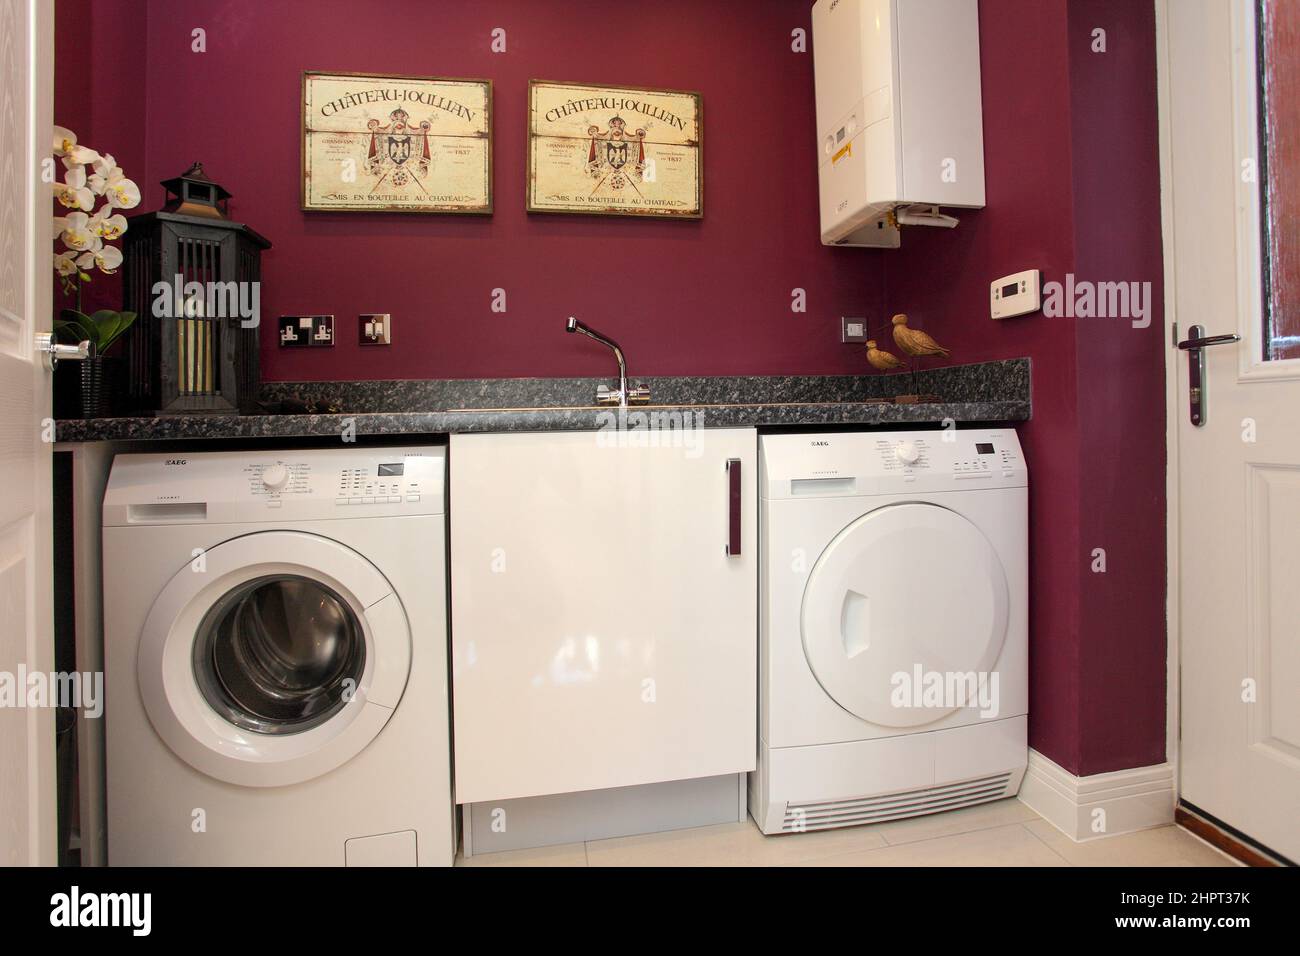 Utility room in modern new build house, washing machine, tumble dryer, dark pink purple feature walls. Stock Photo